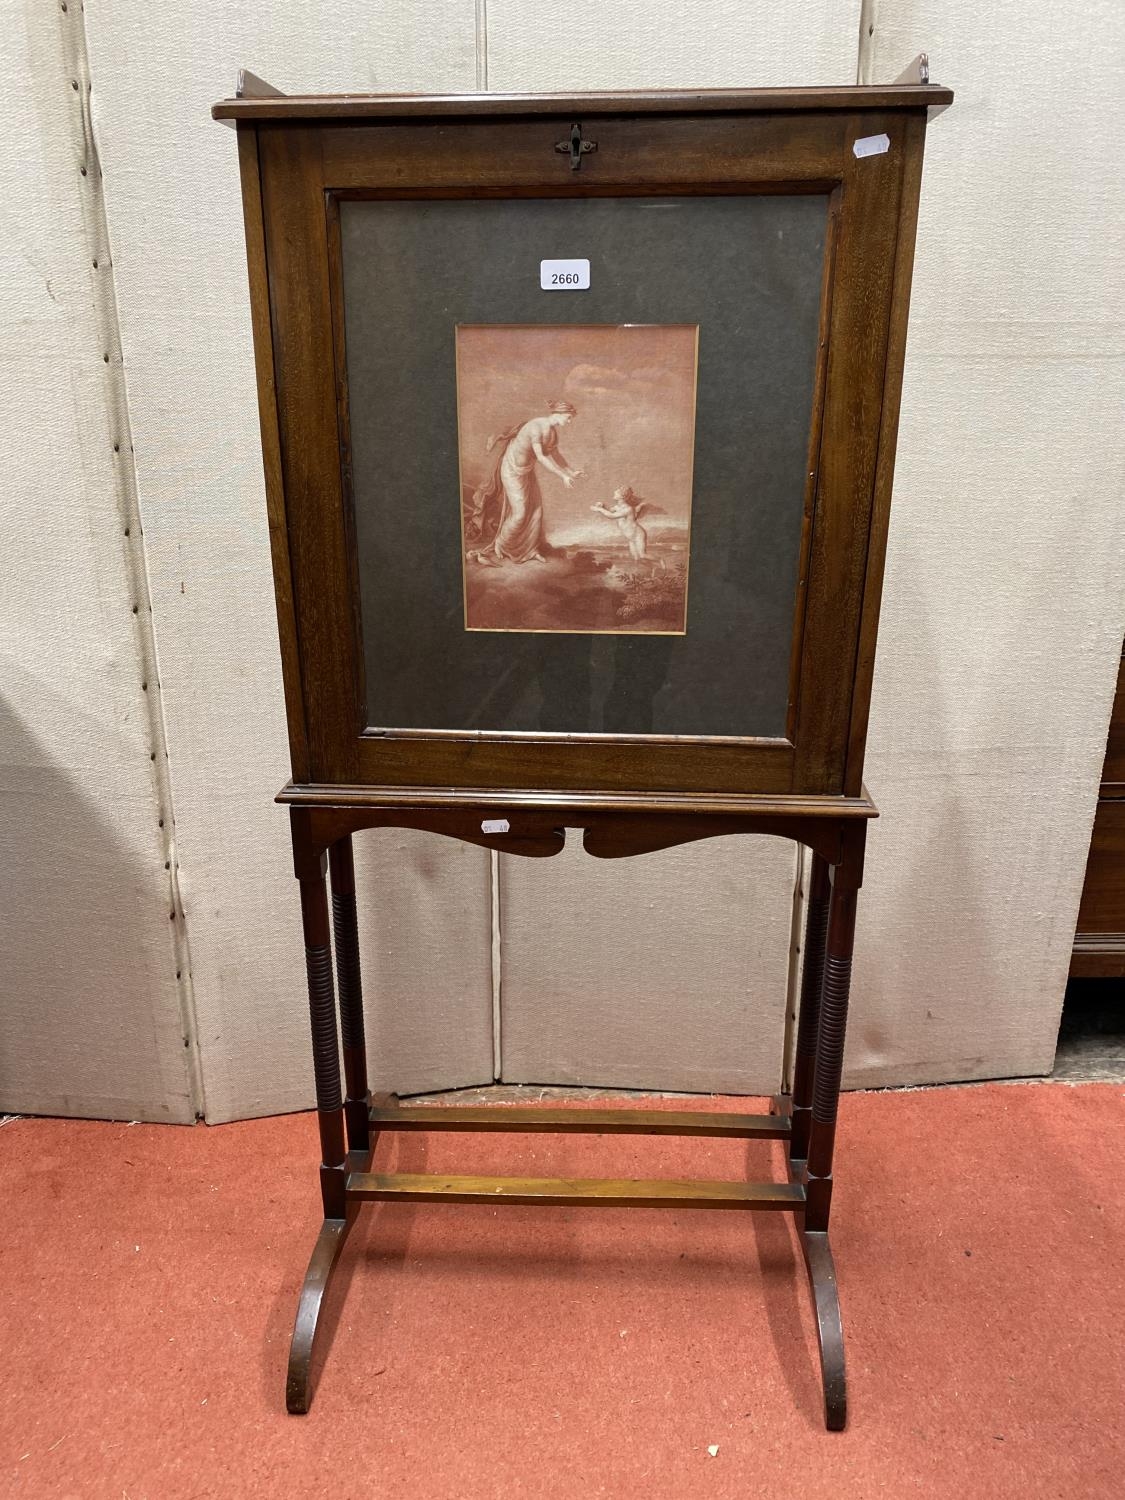 An Edwardian mahogany inlaid writing desk or folio stand, the fall flap revealing a fitted